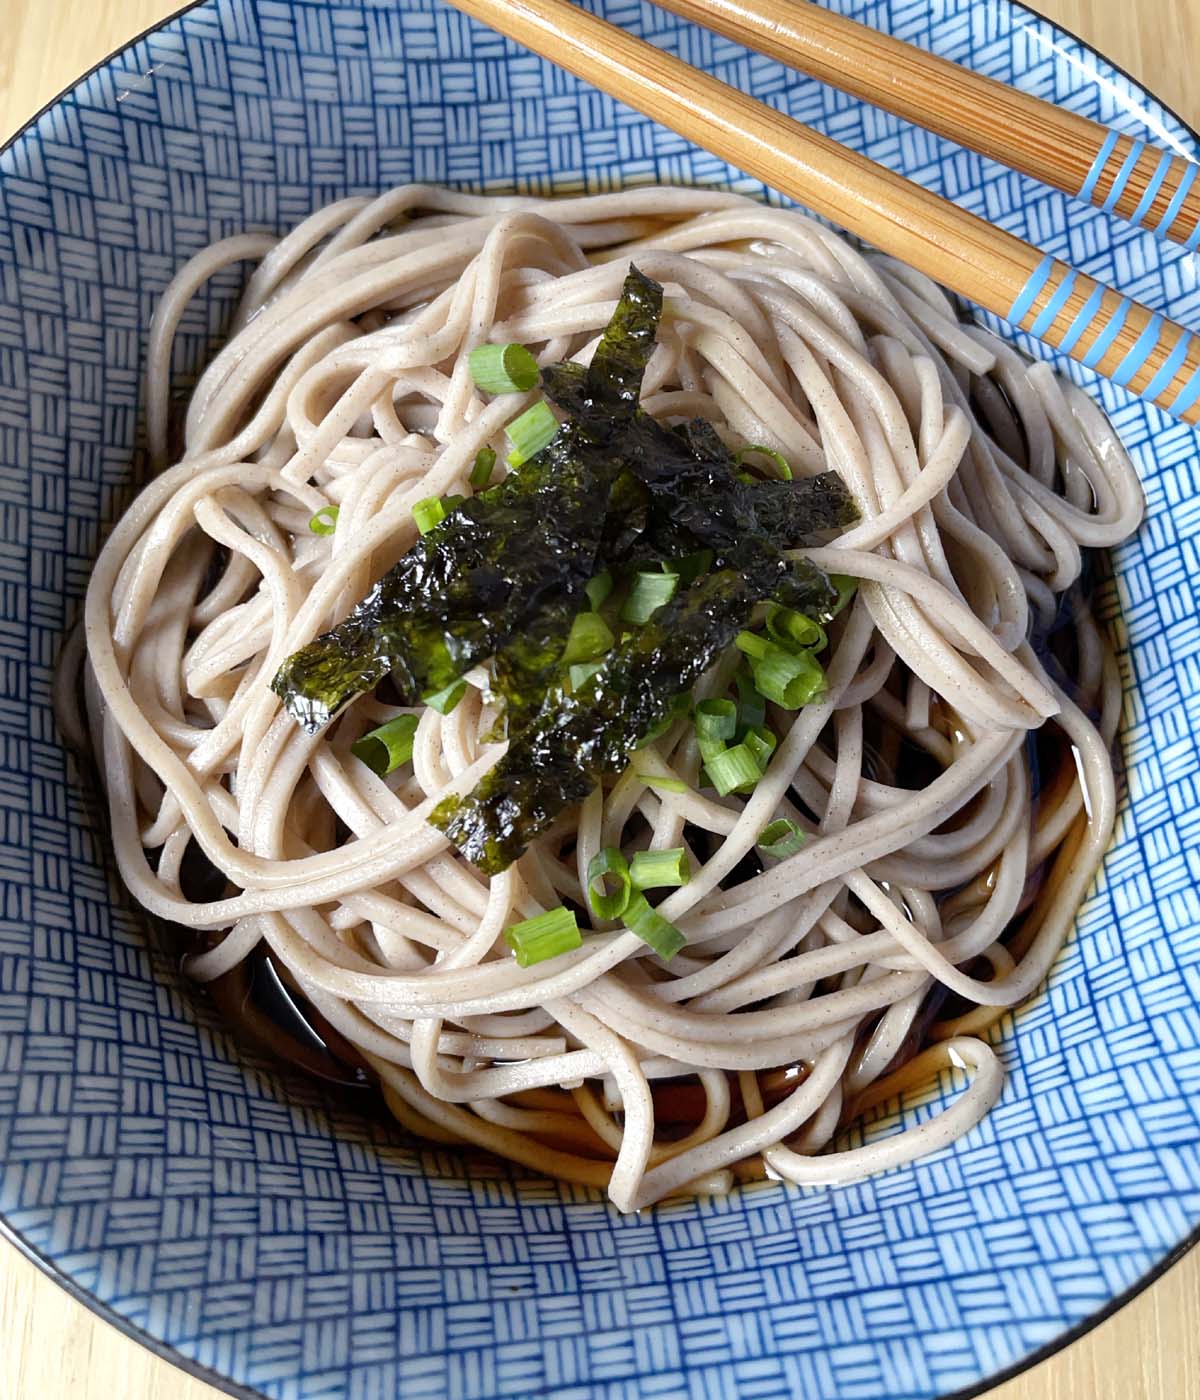 A pair of wooden chopsticks on a blue bowl containing light brown soba noodles and brown sauce, topped with chopped green onions and seaweed strips.